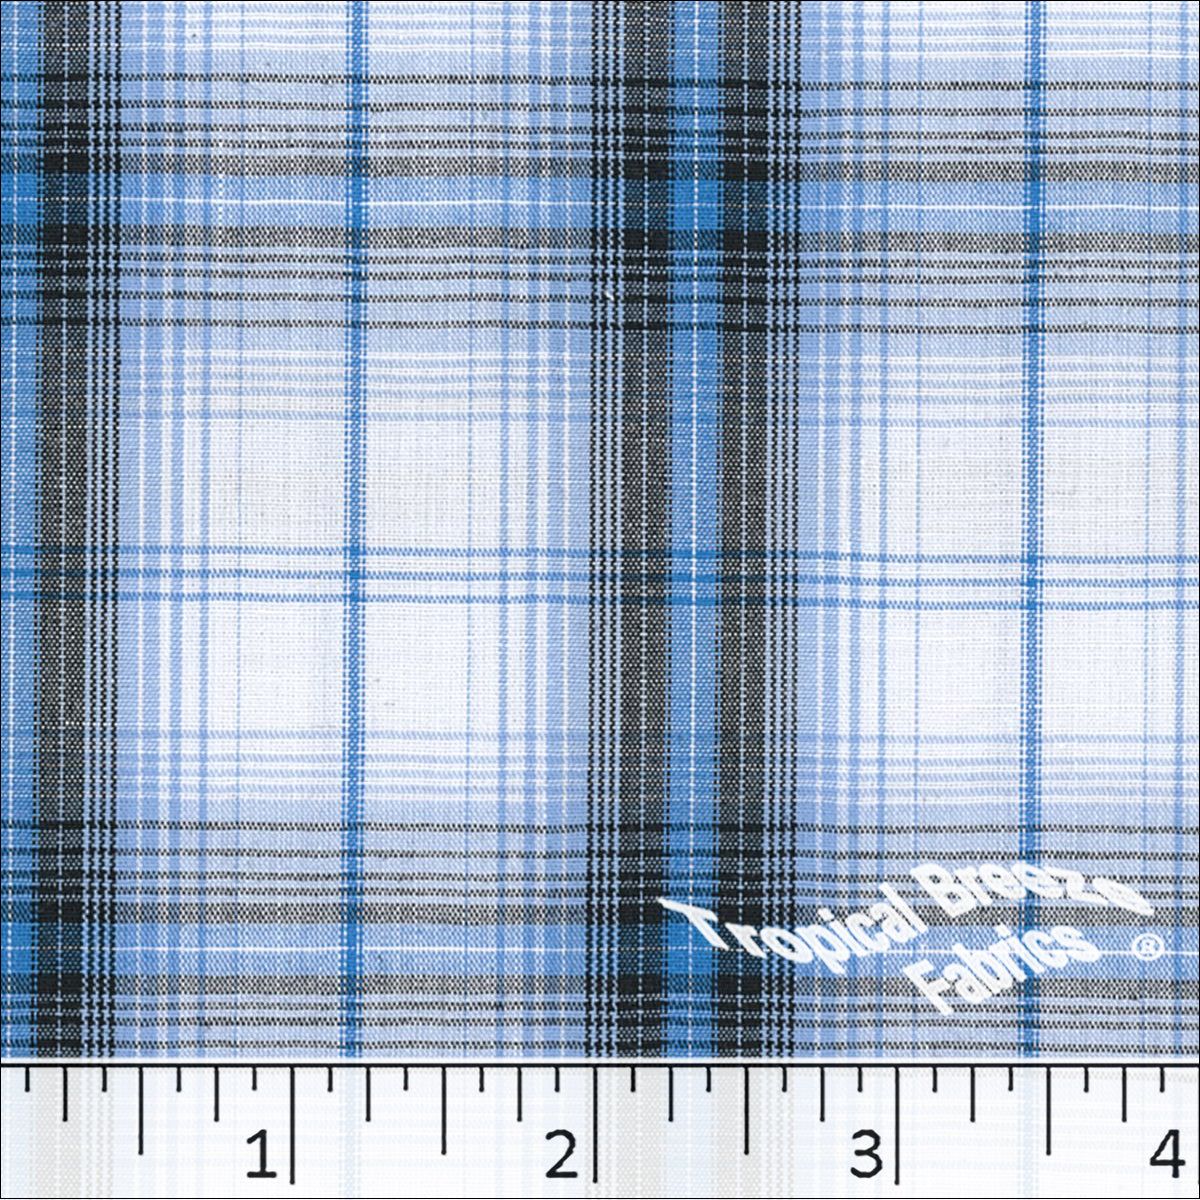 Wool Plaid Fabric in Turquoise Teal Brown Wine 13 yards